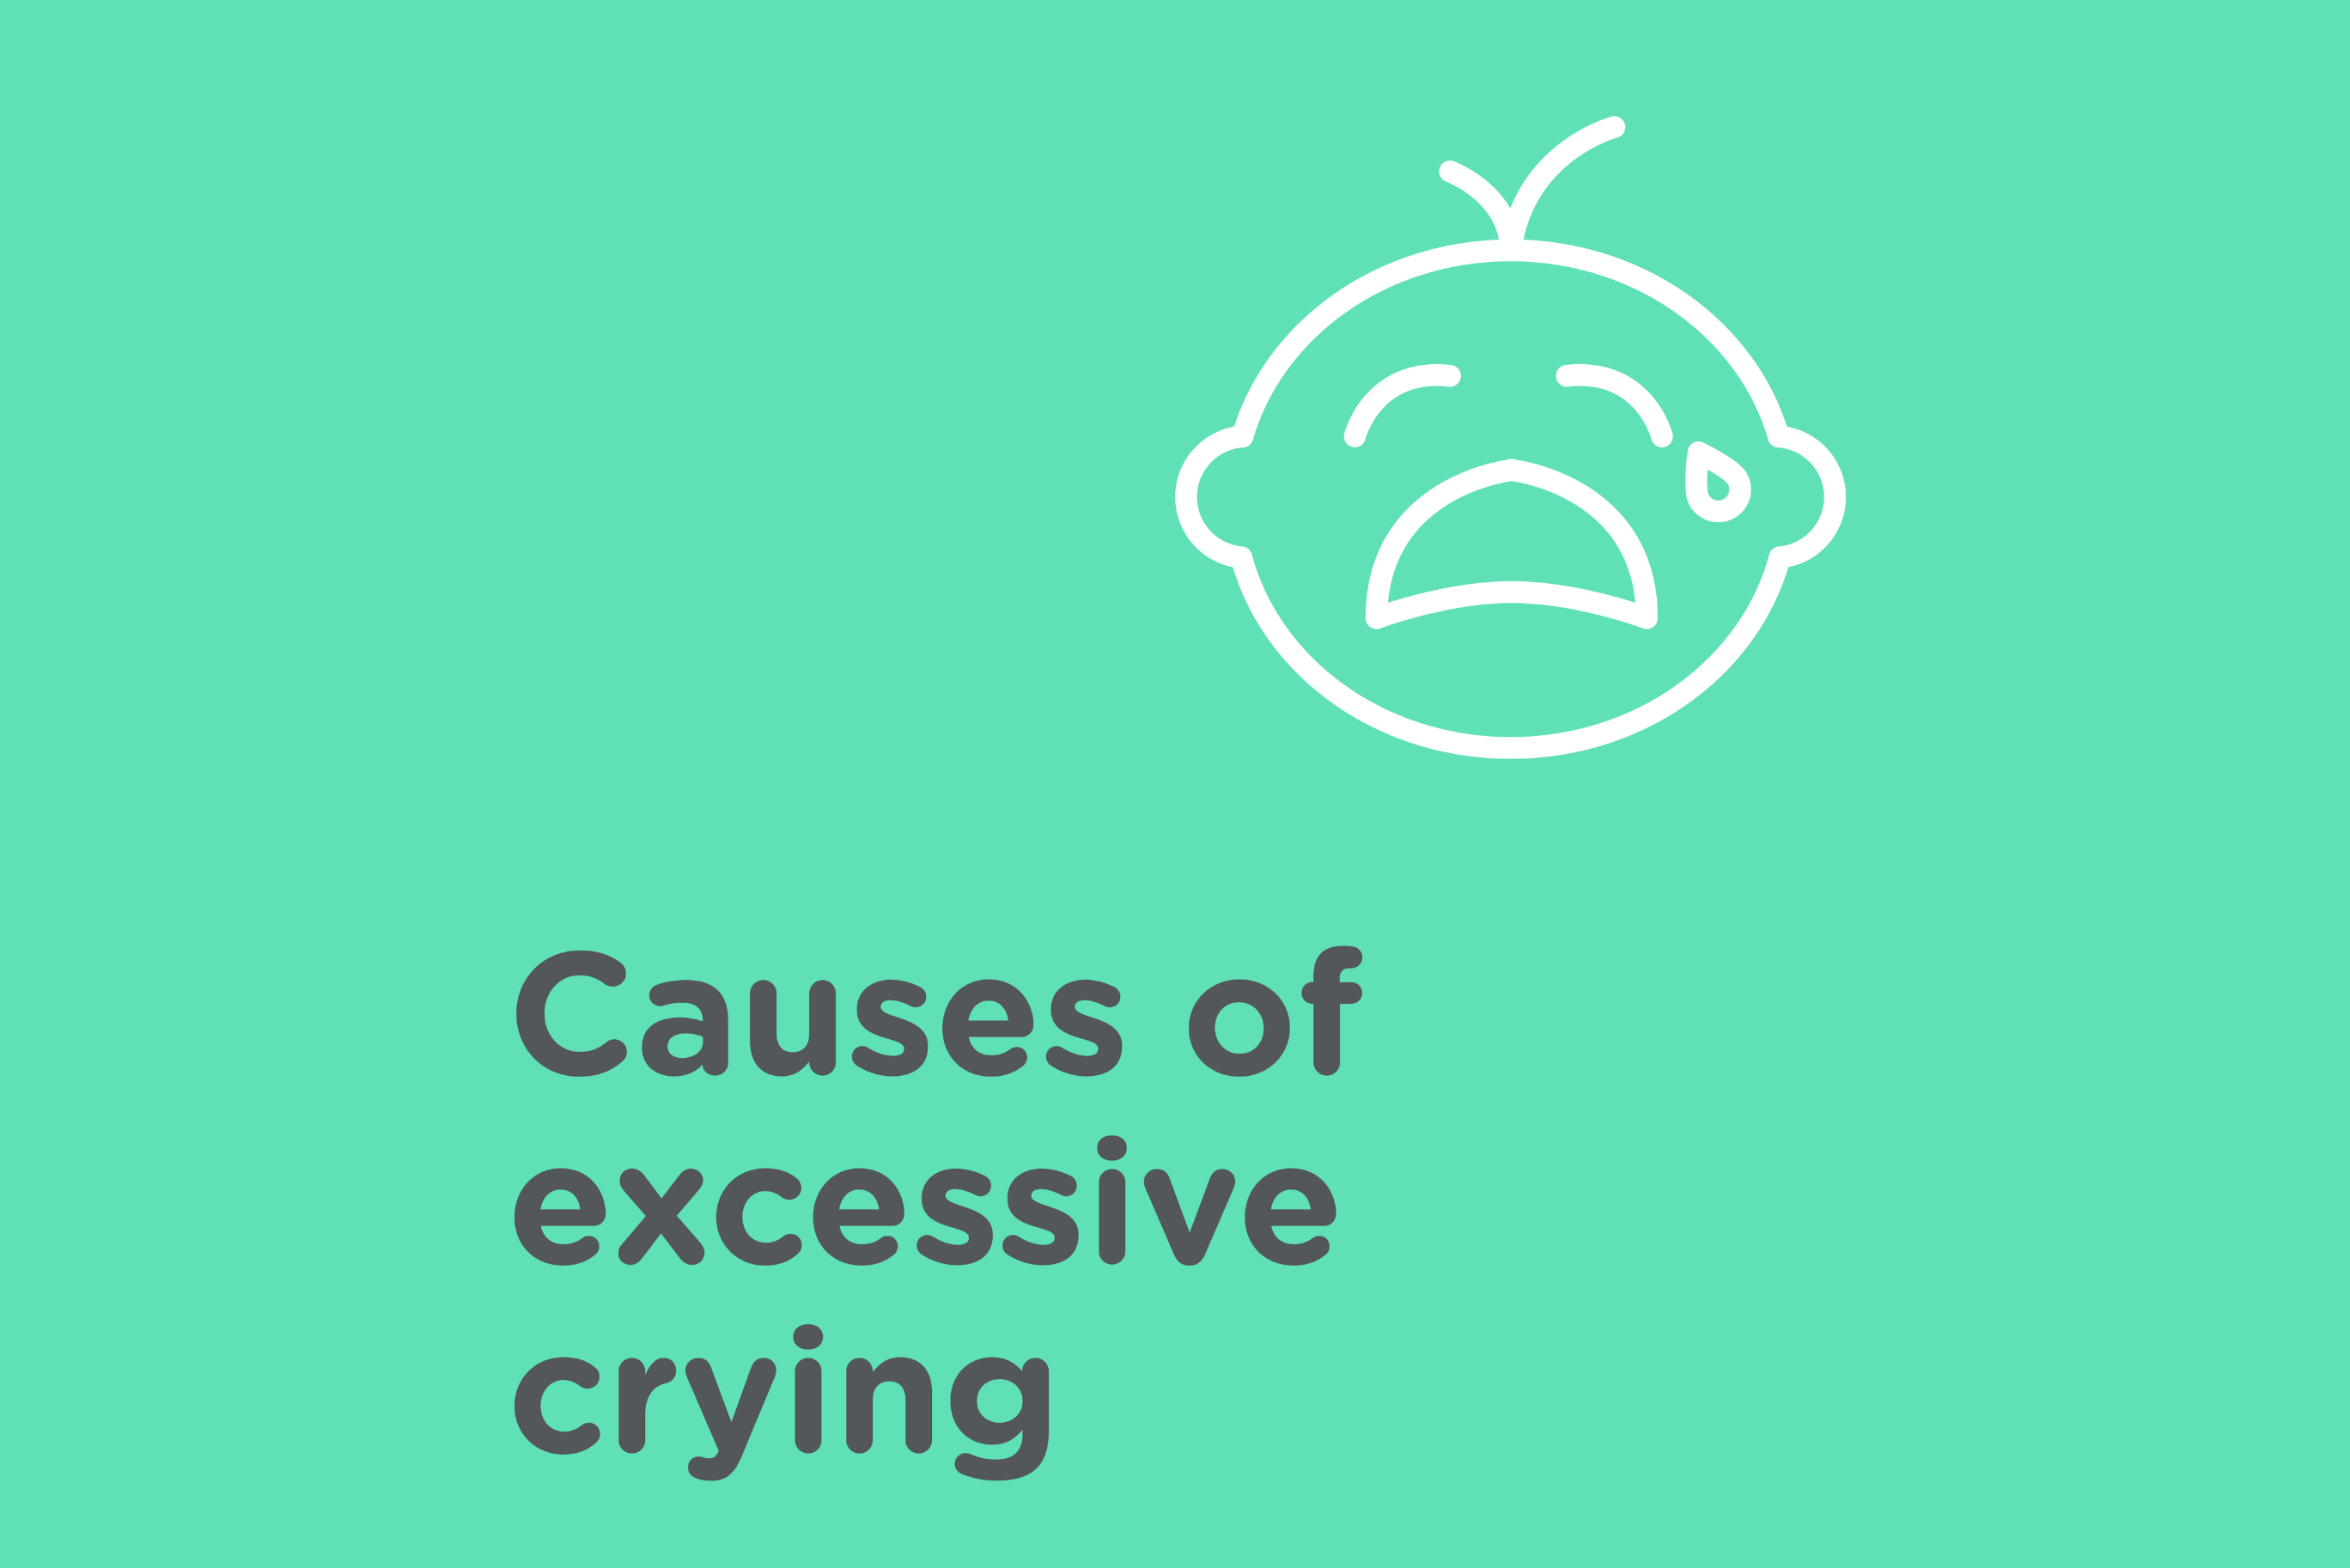 Baby crying icon with writing Causes of excessive crying